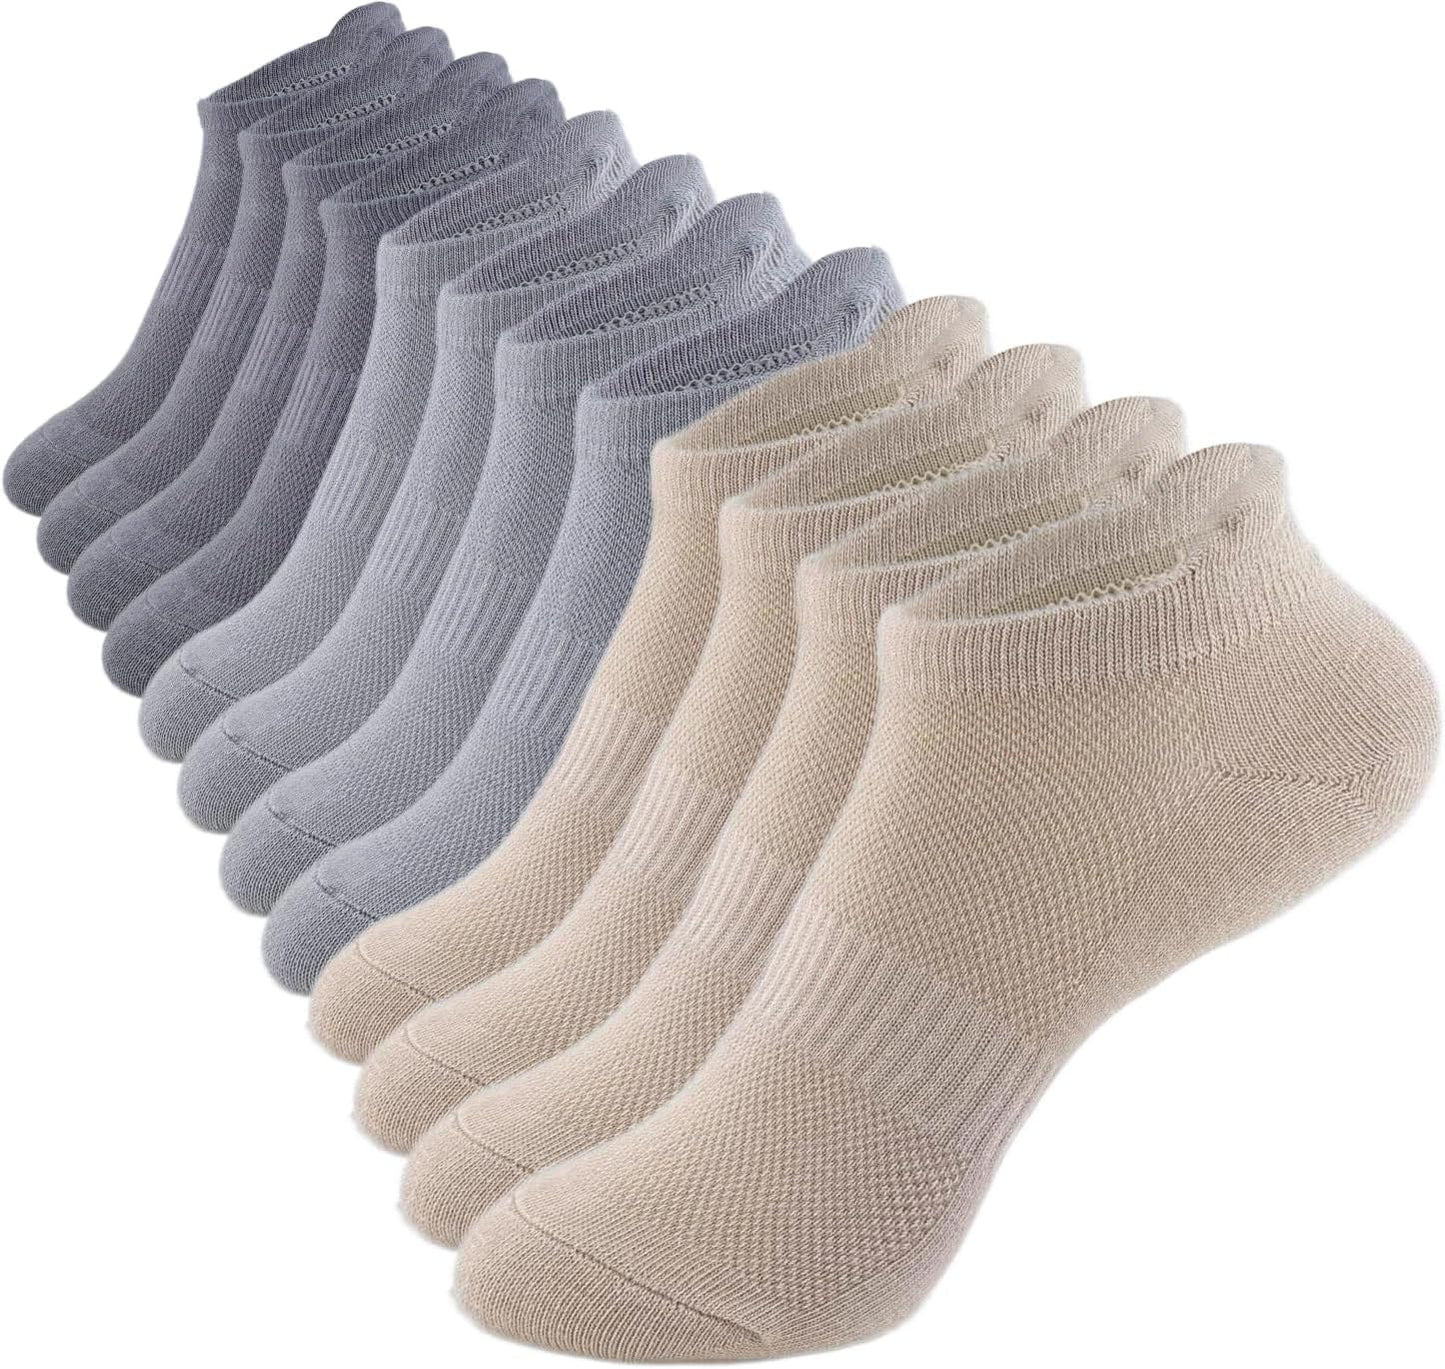 Womens Ankle Socks Athletic Running Low Cut Socks With Tab 6 Pairs